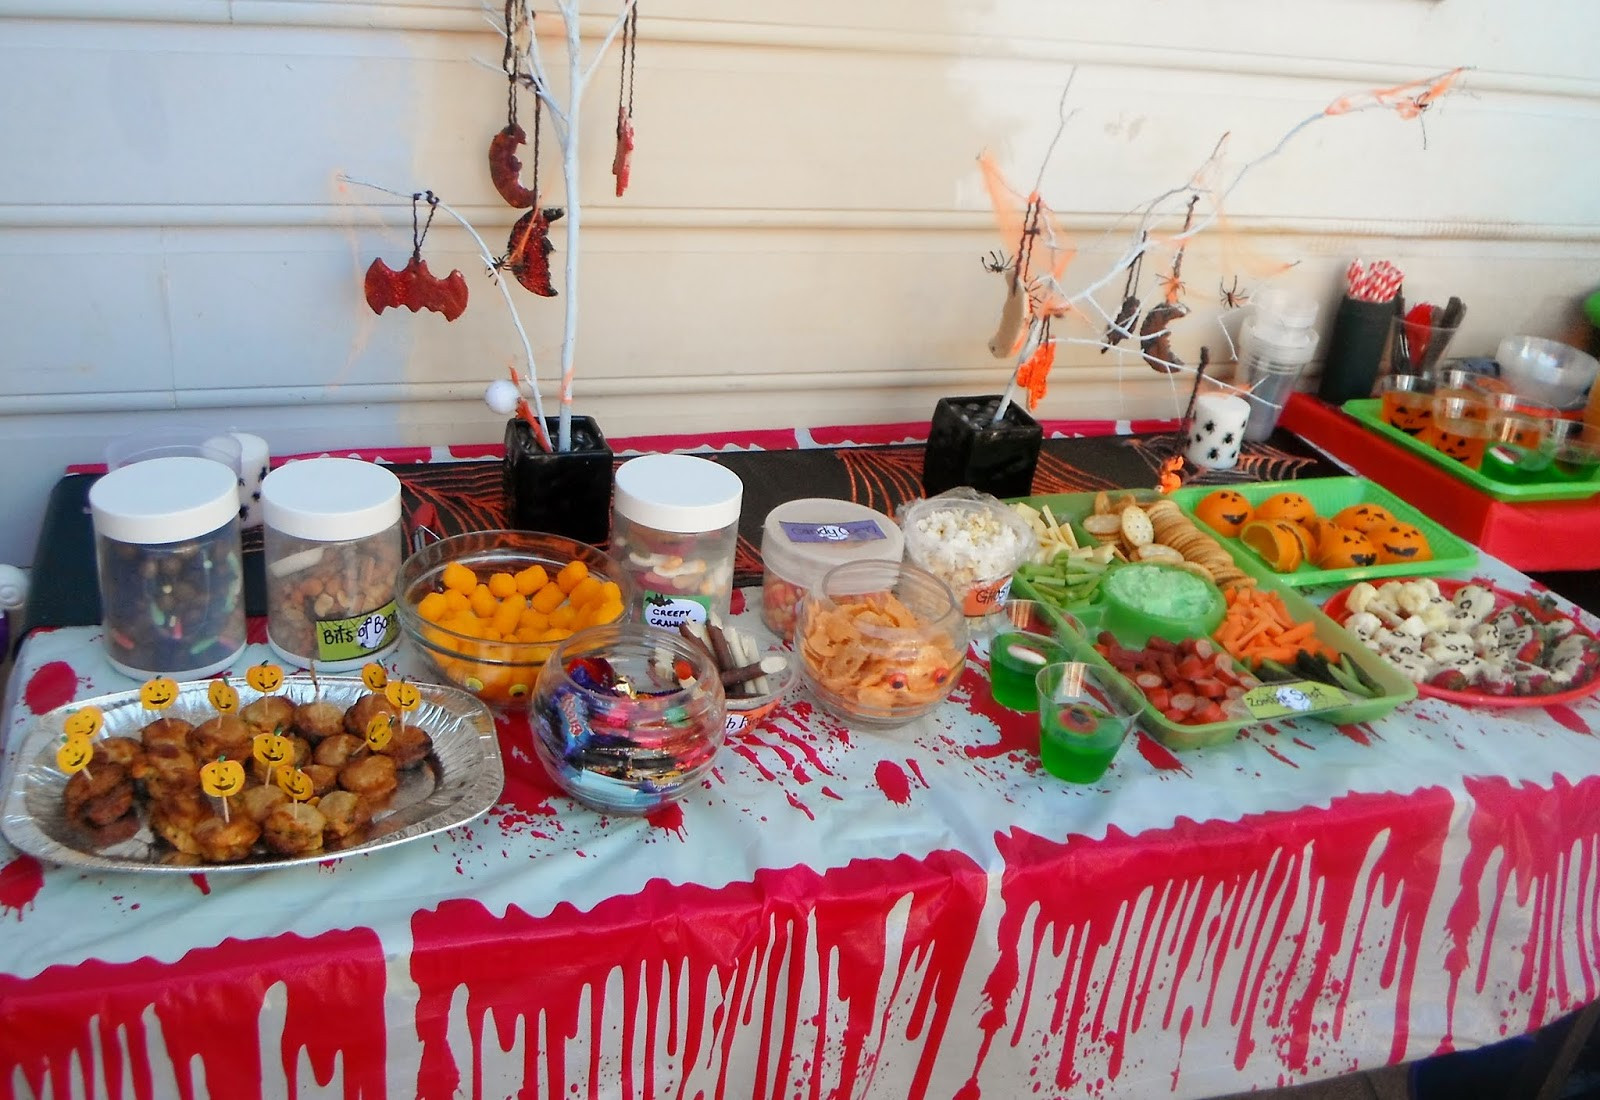 Party Food Table Ideas
 Adventures at home with Mum Halloween Party Food